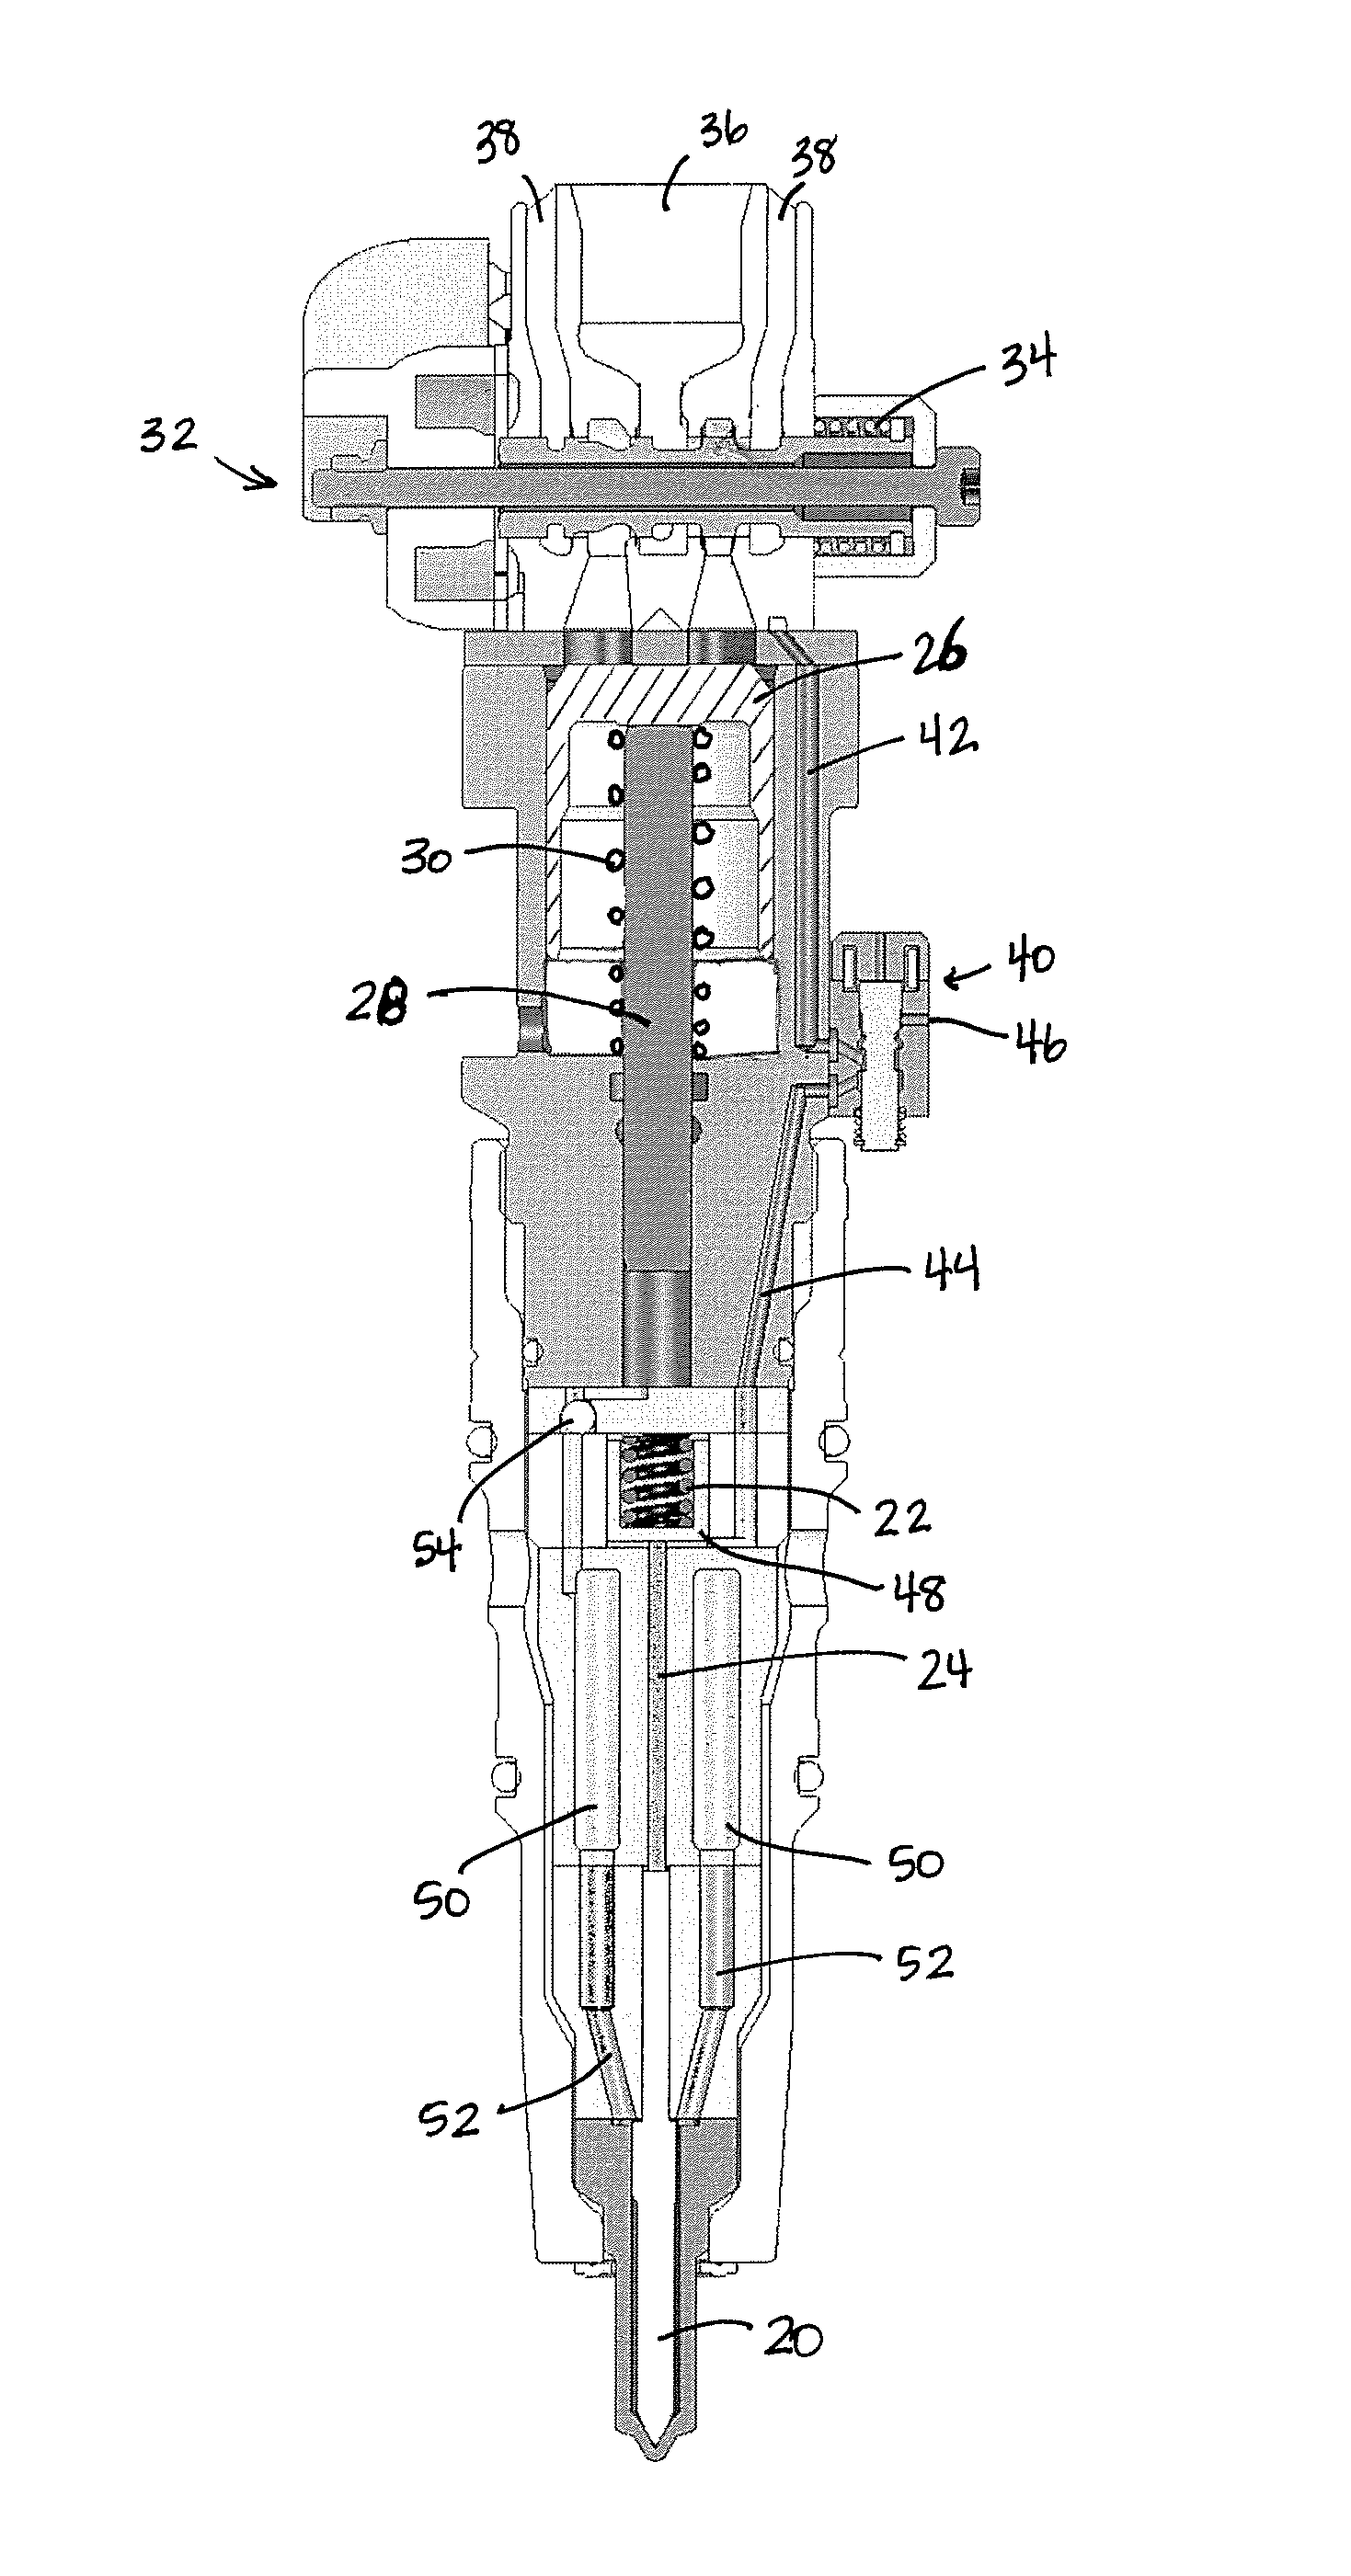 Methods of Operation of Fuel Injectors with Intensified Fuel Storage